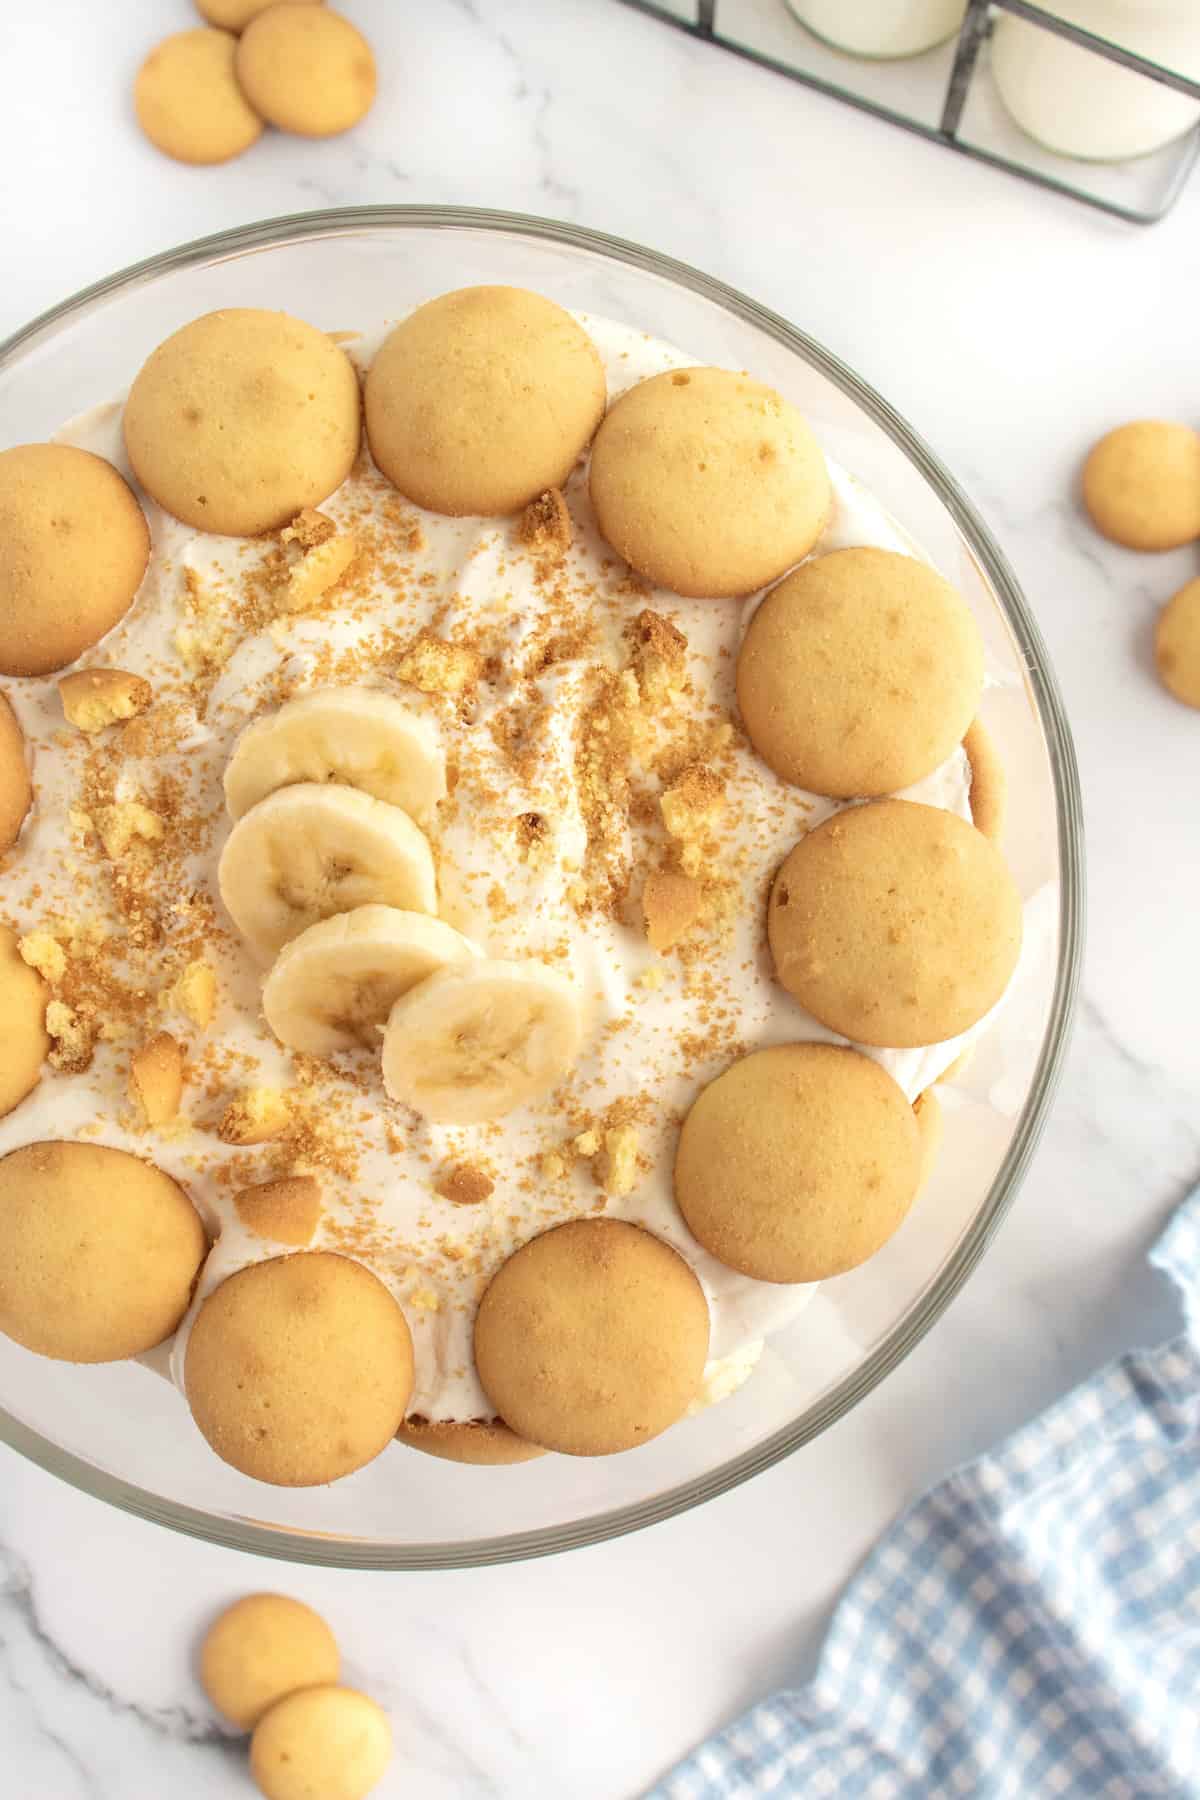 A large container of banana pudding topped with banana slices and vanilla wafers.